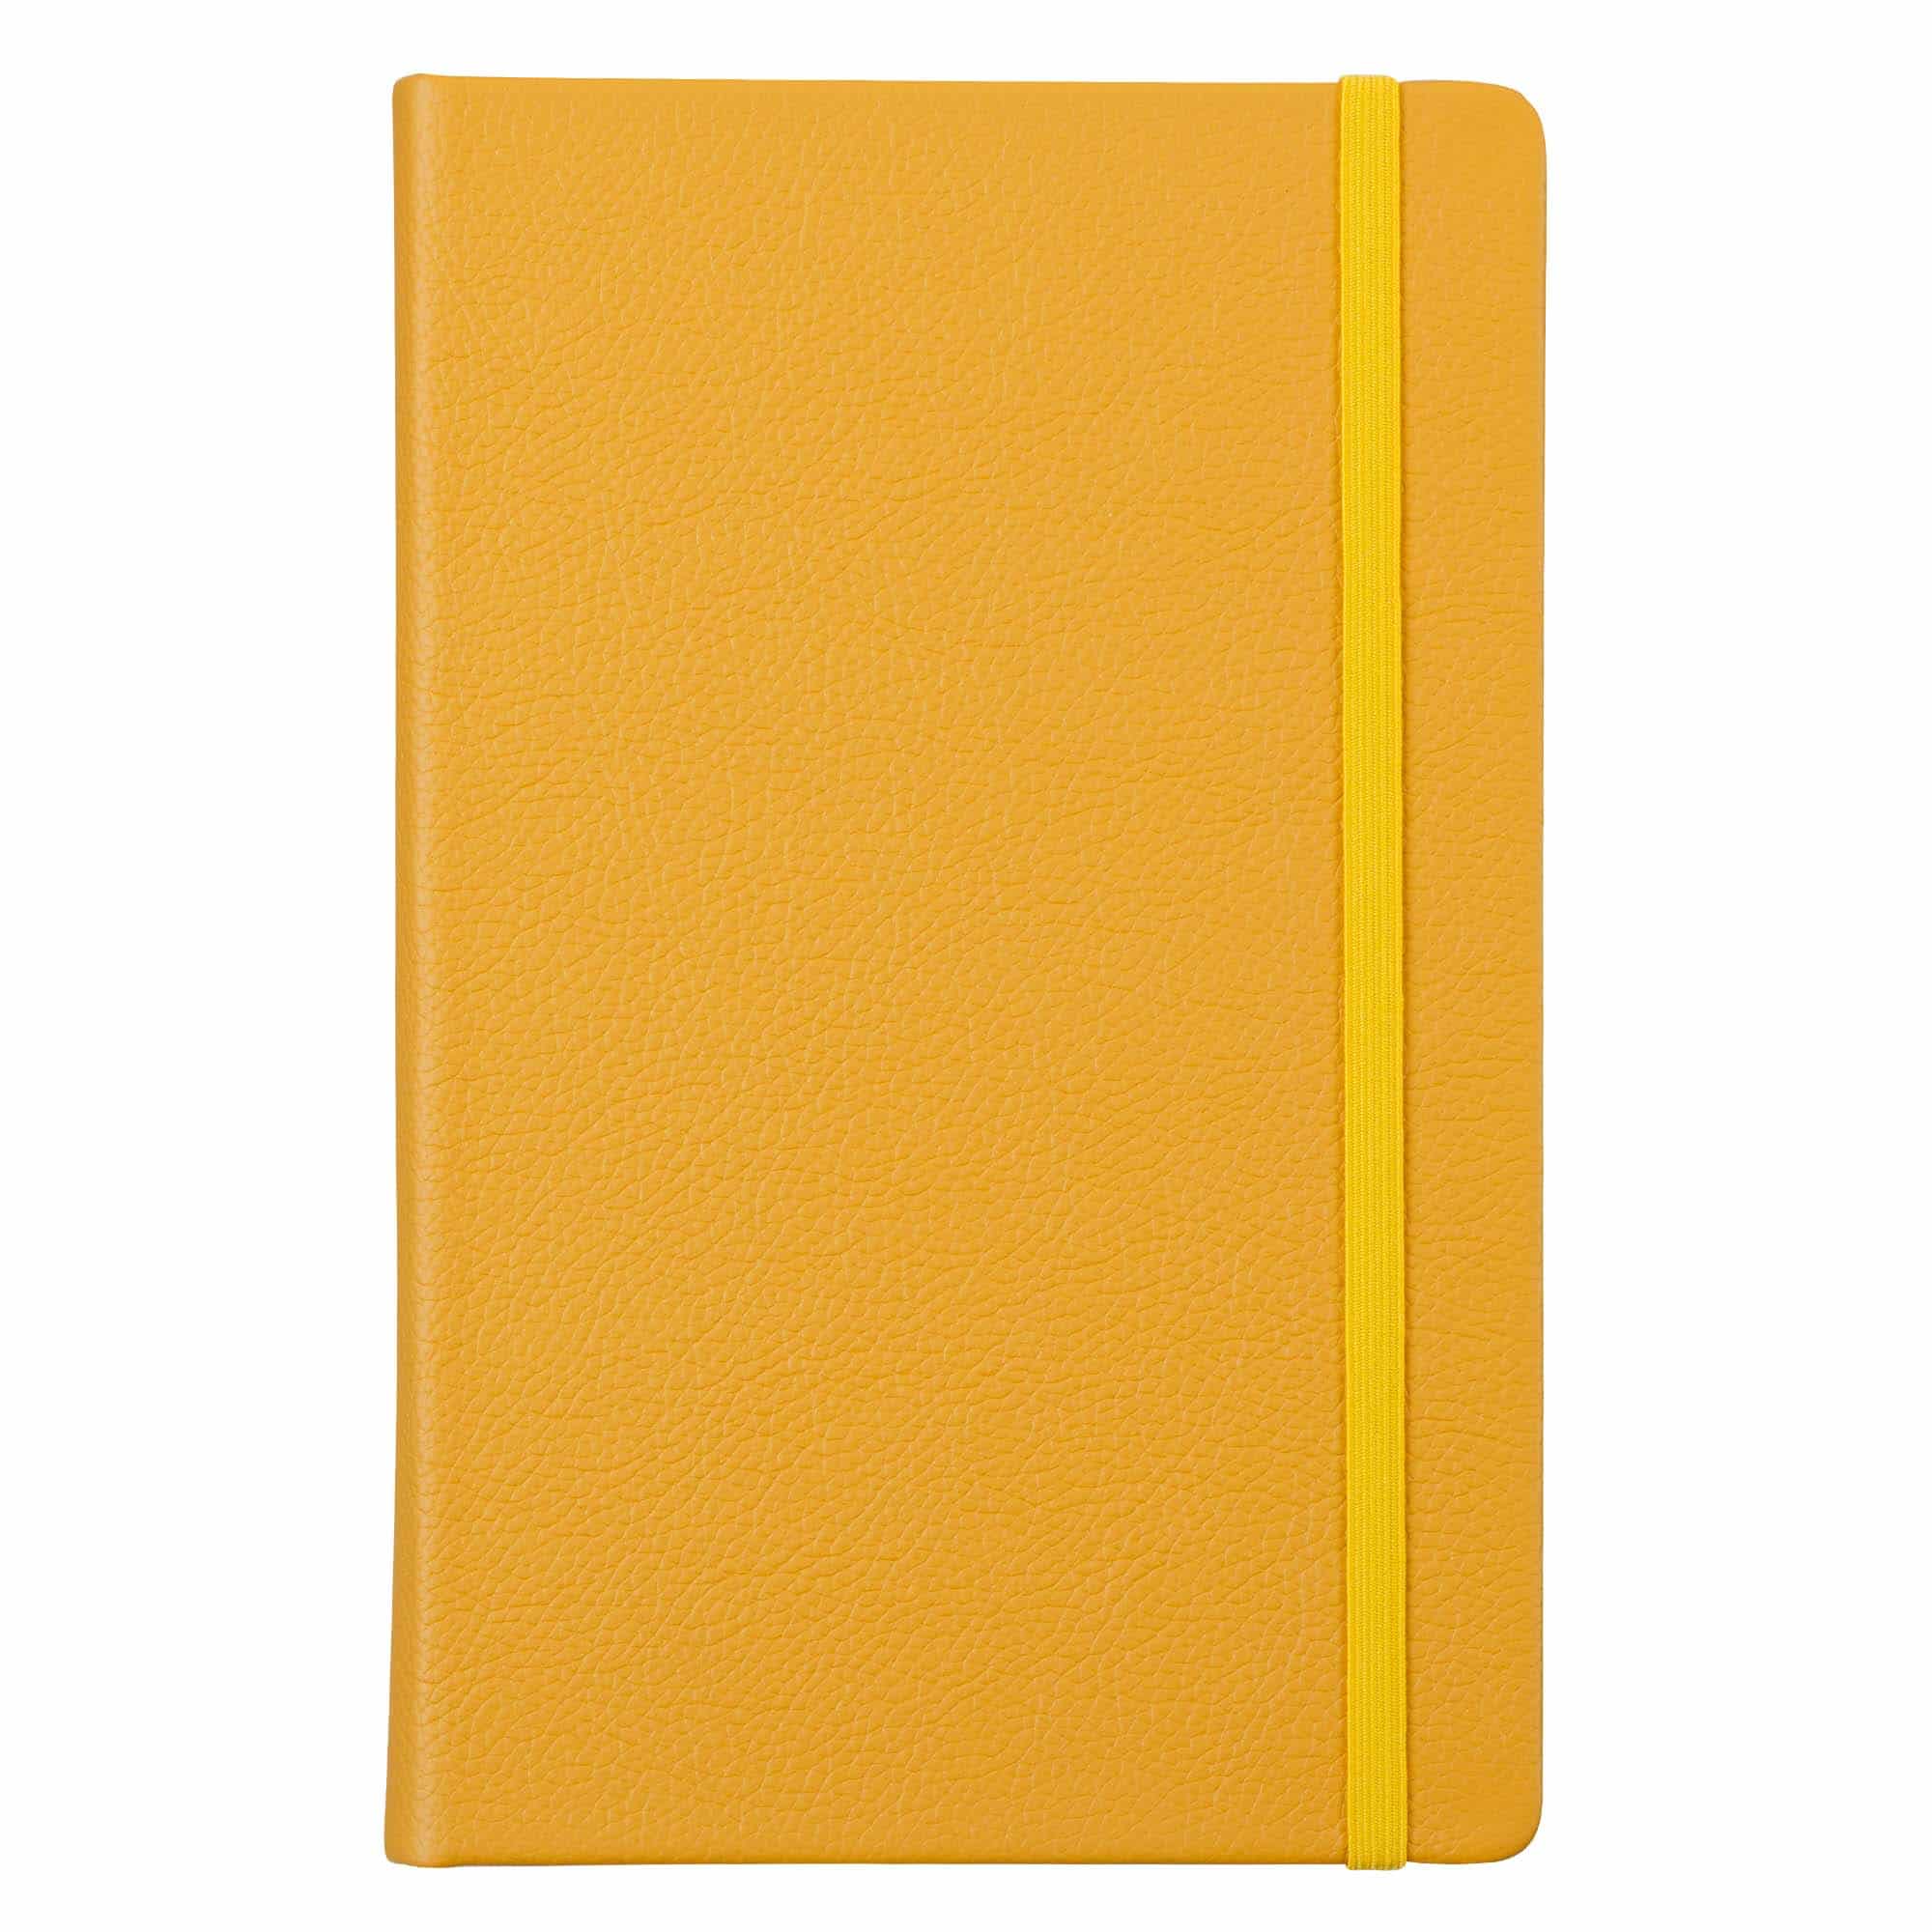 Butter Yellow Leather Notebook